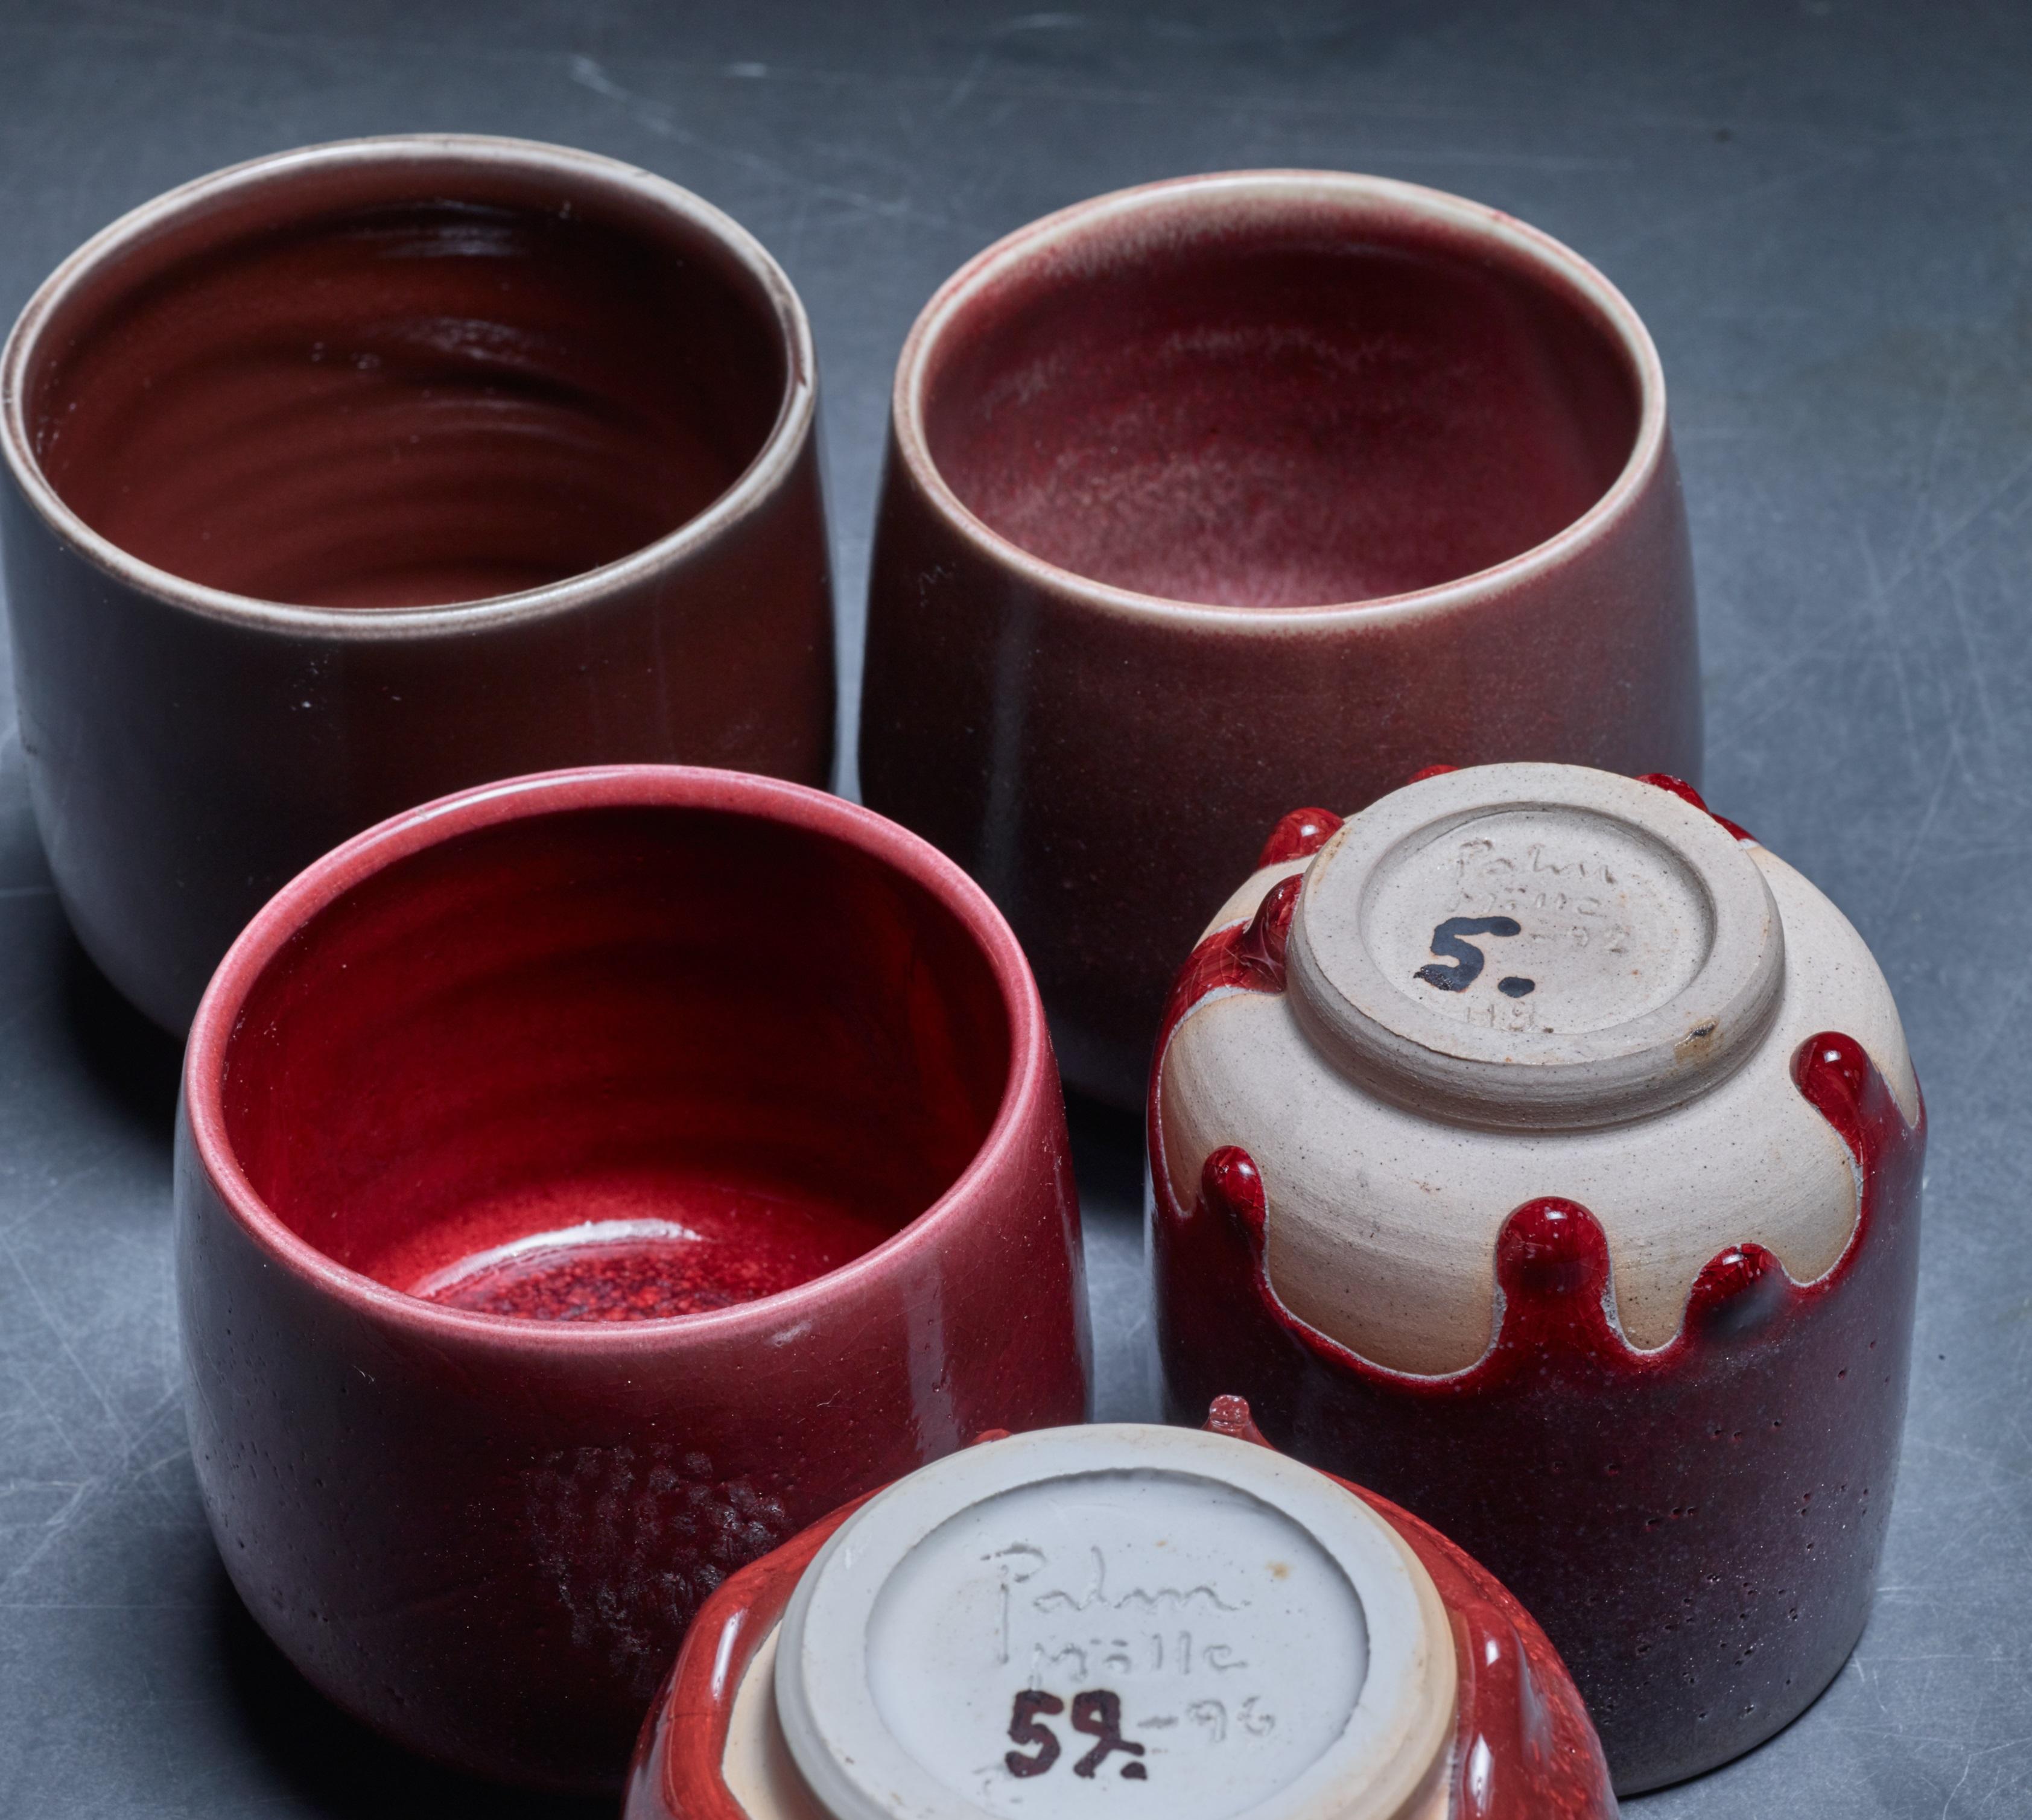 A set of five ceramic vases with a red-brown glaze finish by Rolf Palm.

The pieces are signed by Palm with the year of production (1991 and 1996). Measures: The shortest vase is 8.5 (3.3 inch) high with a 10 cm (4 inch) diameter. The tallest one is